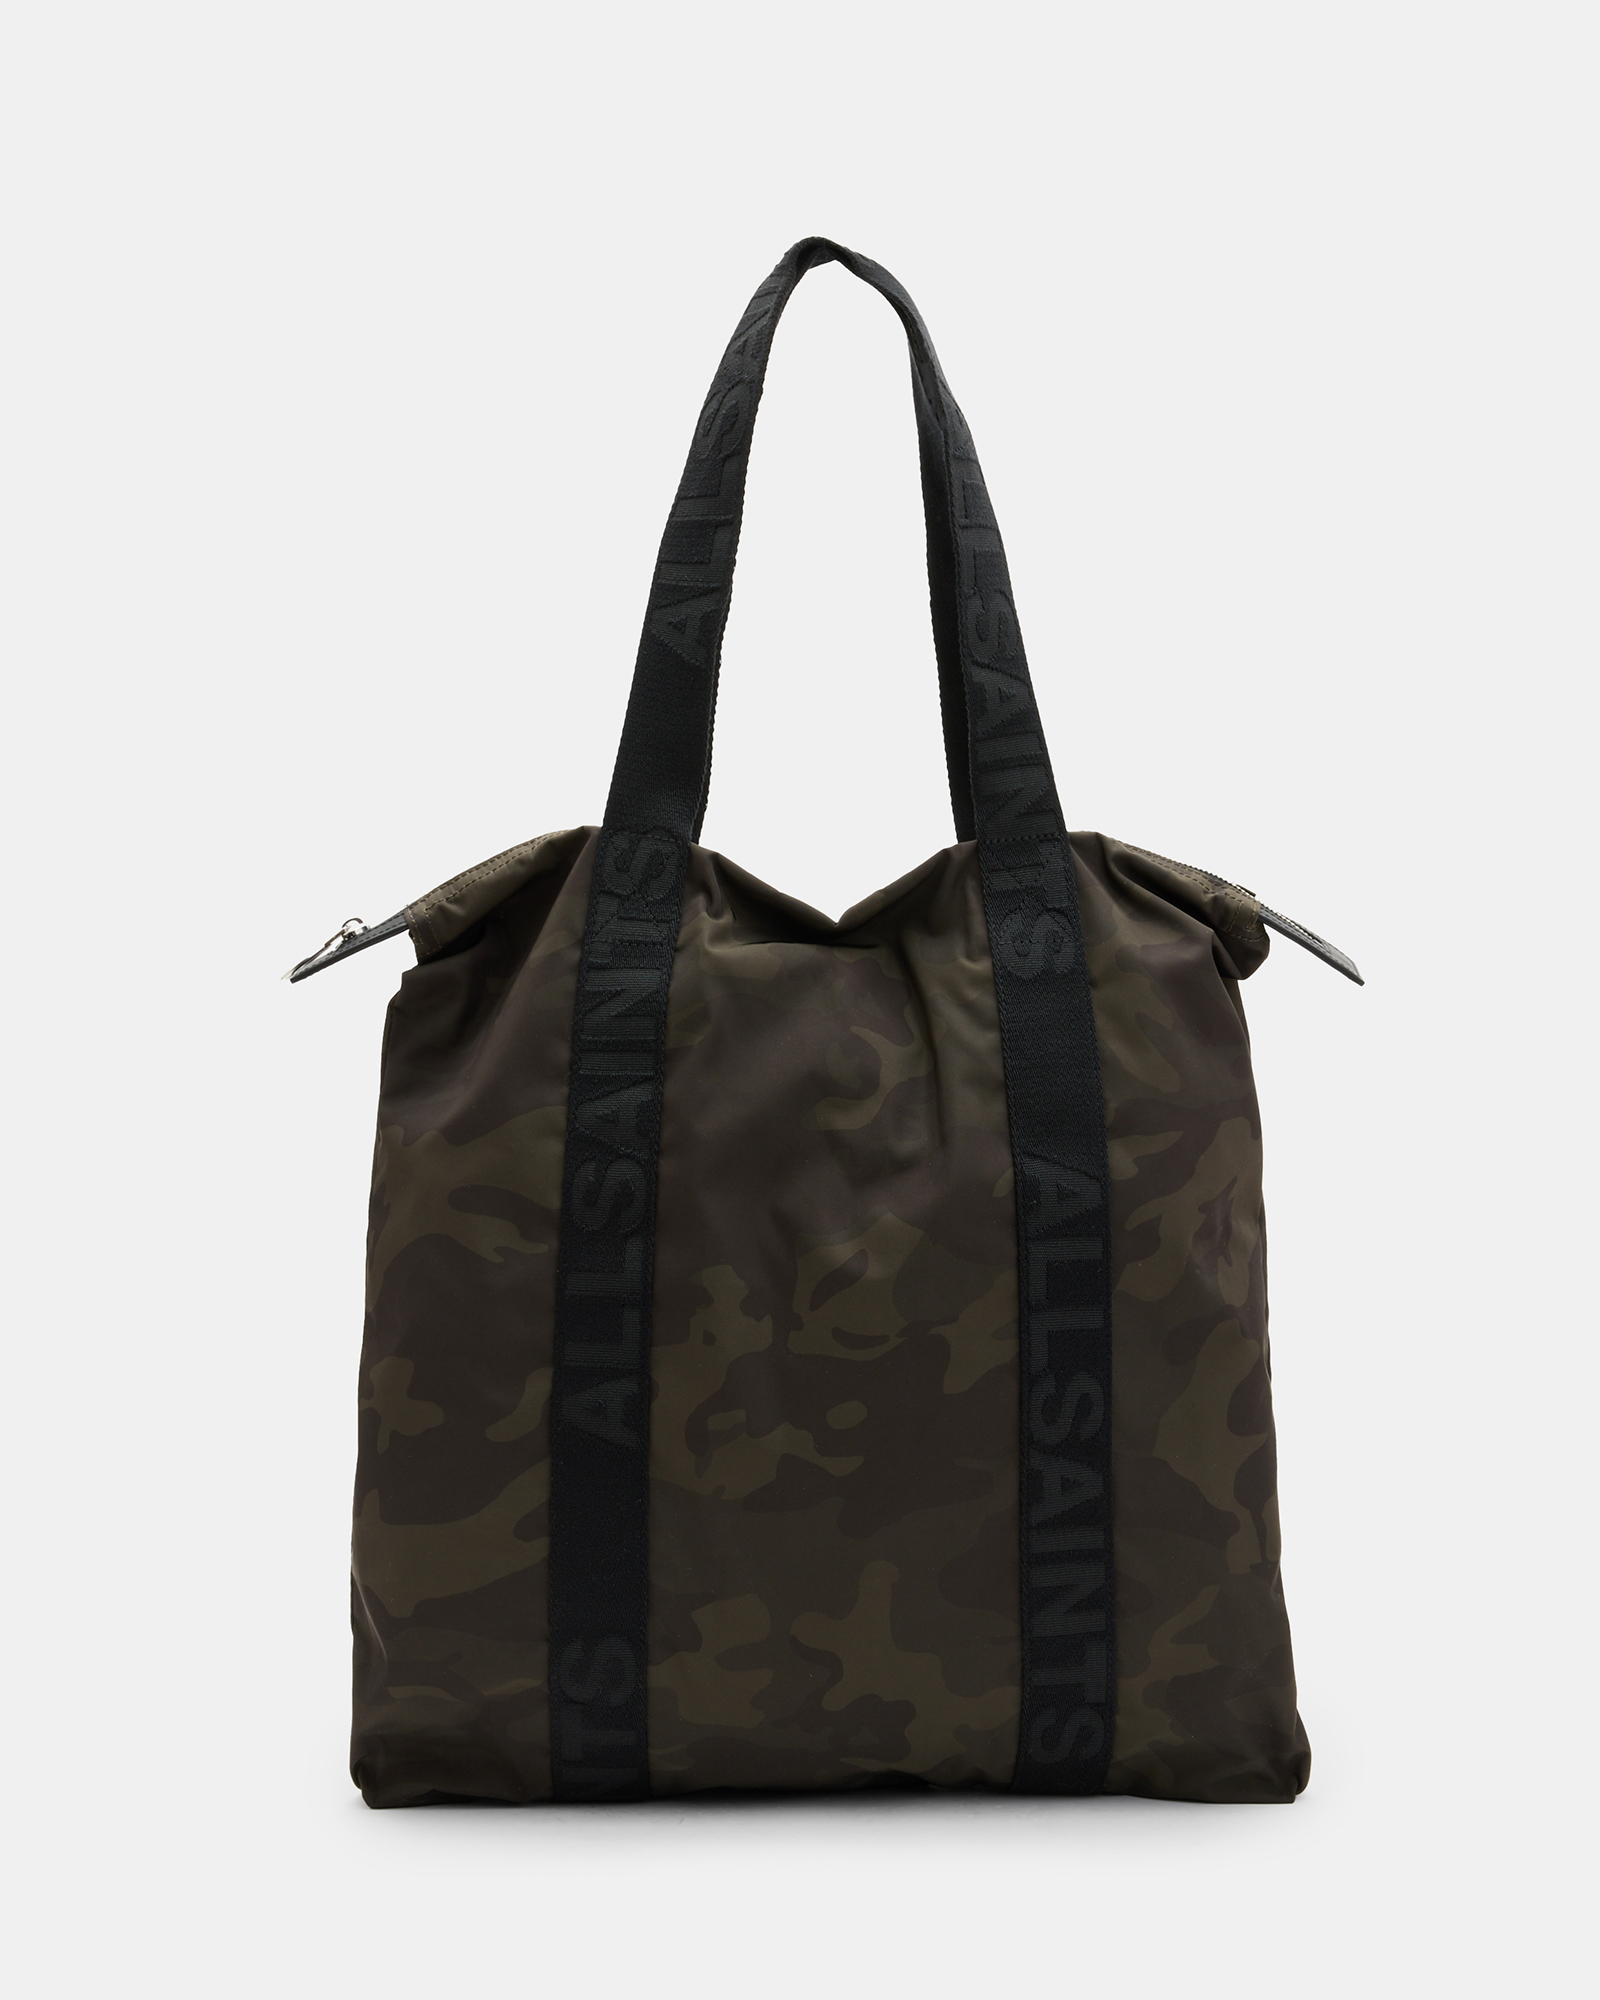 AllSaints Afan Spacious Recycled Tote Bag,, DARK CAMO GREEN